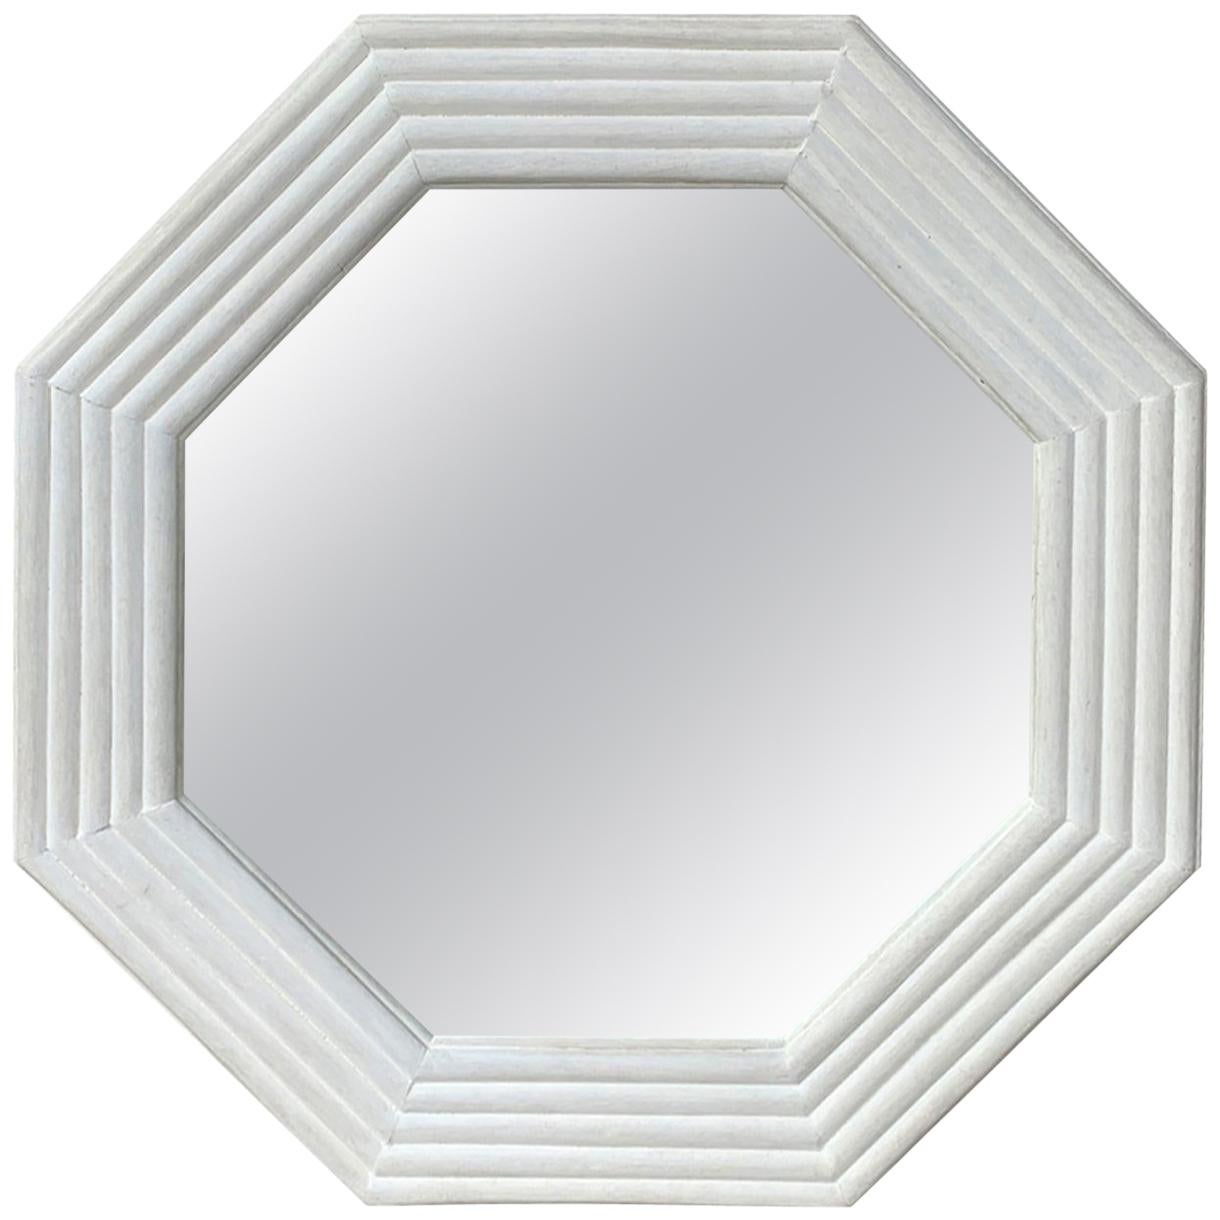 Mid-20th Century Faux Bamboo Custom Painted Octagonal Mirror